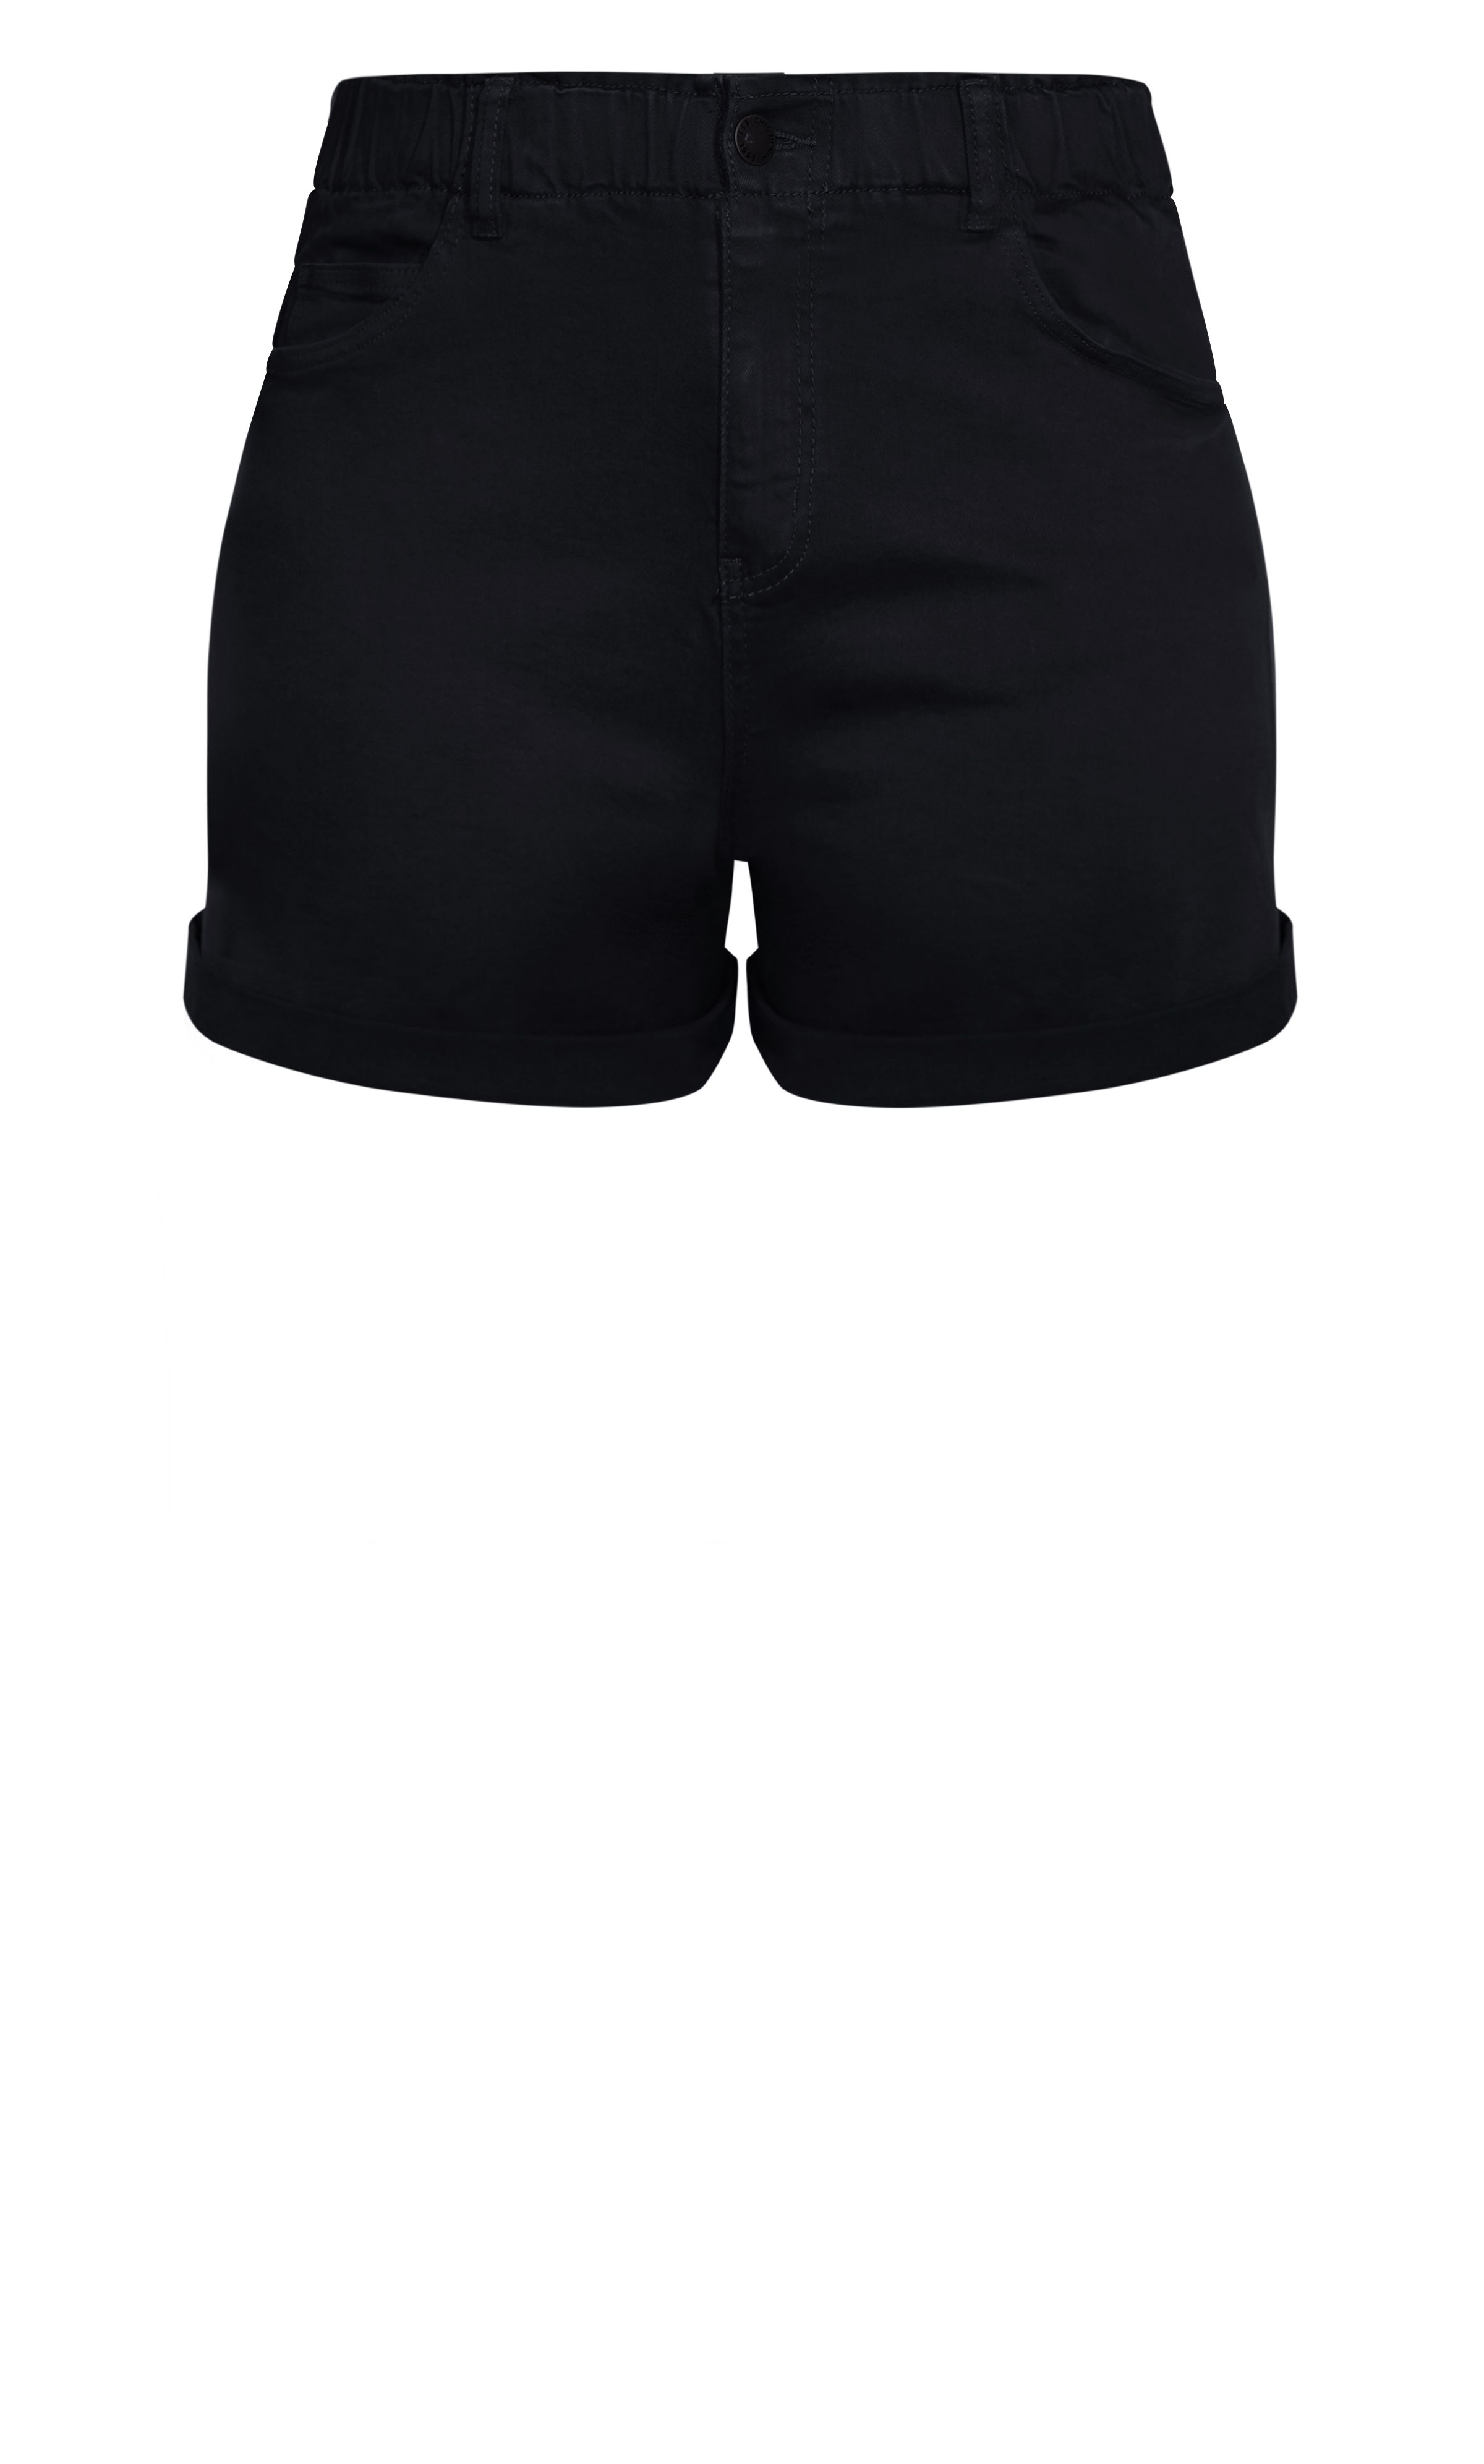 Looking for shorts that are comfortable and trendy? Look no further than the Ruffle Waist Short. Boasting an elasticized ruffled waistband for a fresh and youthful take on denim shorts, this staple offers a mid rise with a cuffed hemline! Key Features Include: - Mid rise - Cuffed hemline - Ruffled elasticized waistband - Classic five pocket denim styling - Fly and single button closure - Belt loops - Signature Chic Denim hardware - 360 Technology stretch denim - High denim fibre retention to maintain shape Combine these shorts with a plain tank top and a cropped denim jacket.